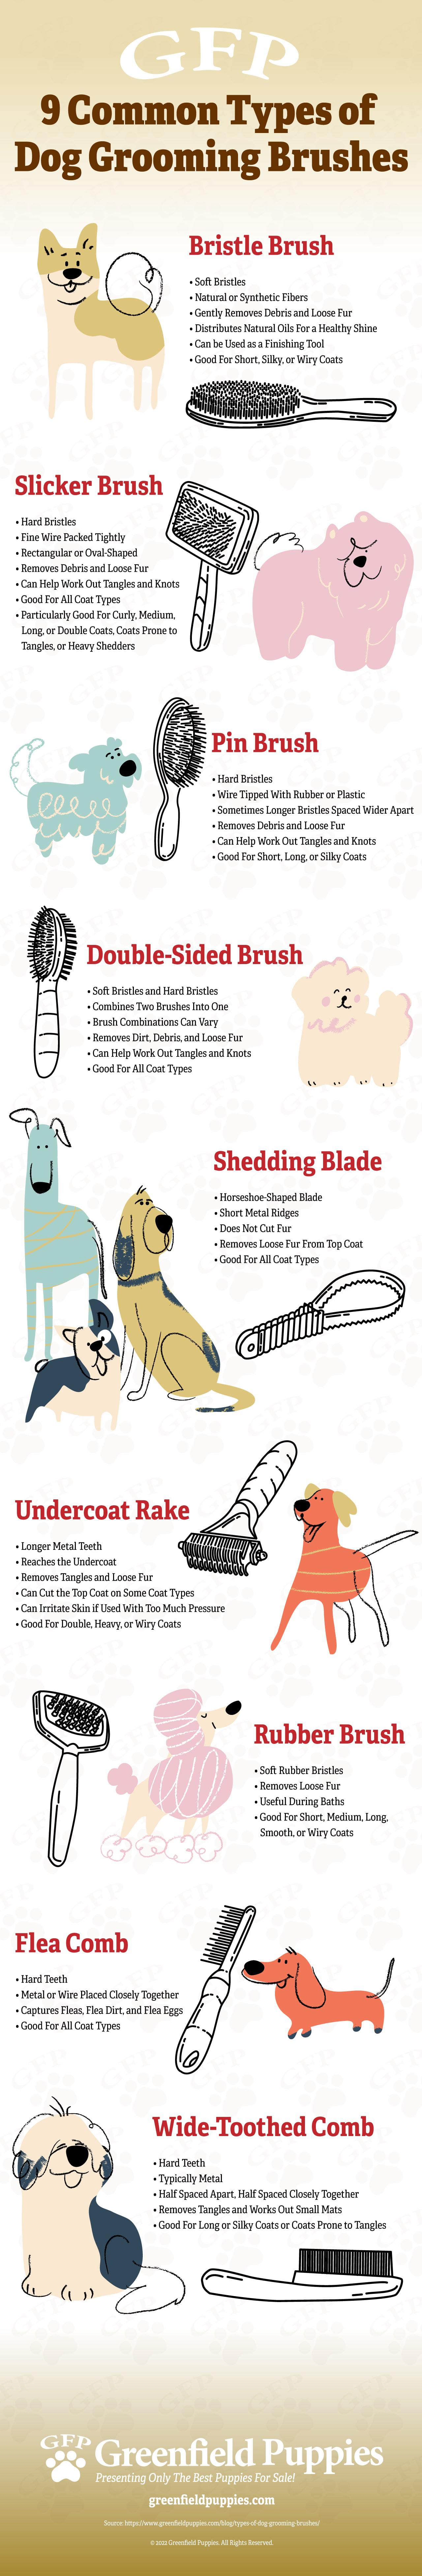 9 Common Types of Dog Grooming Brushes | Greenfield Puppies